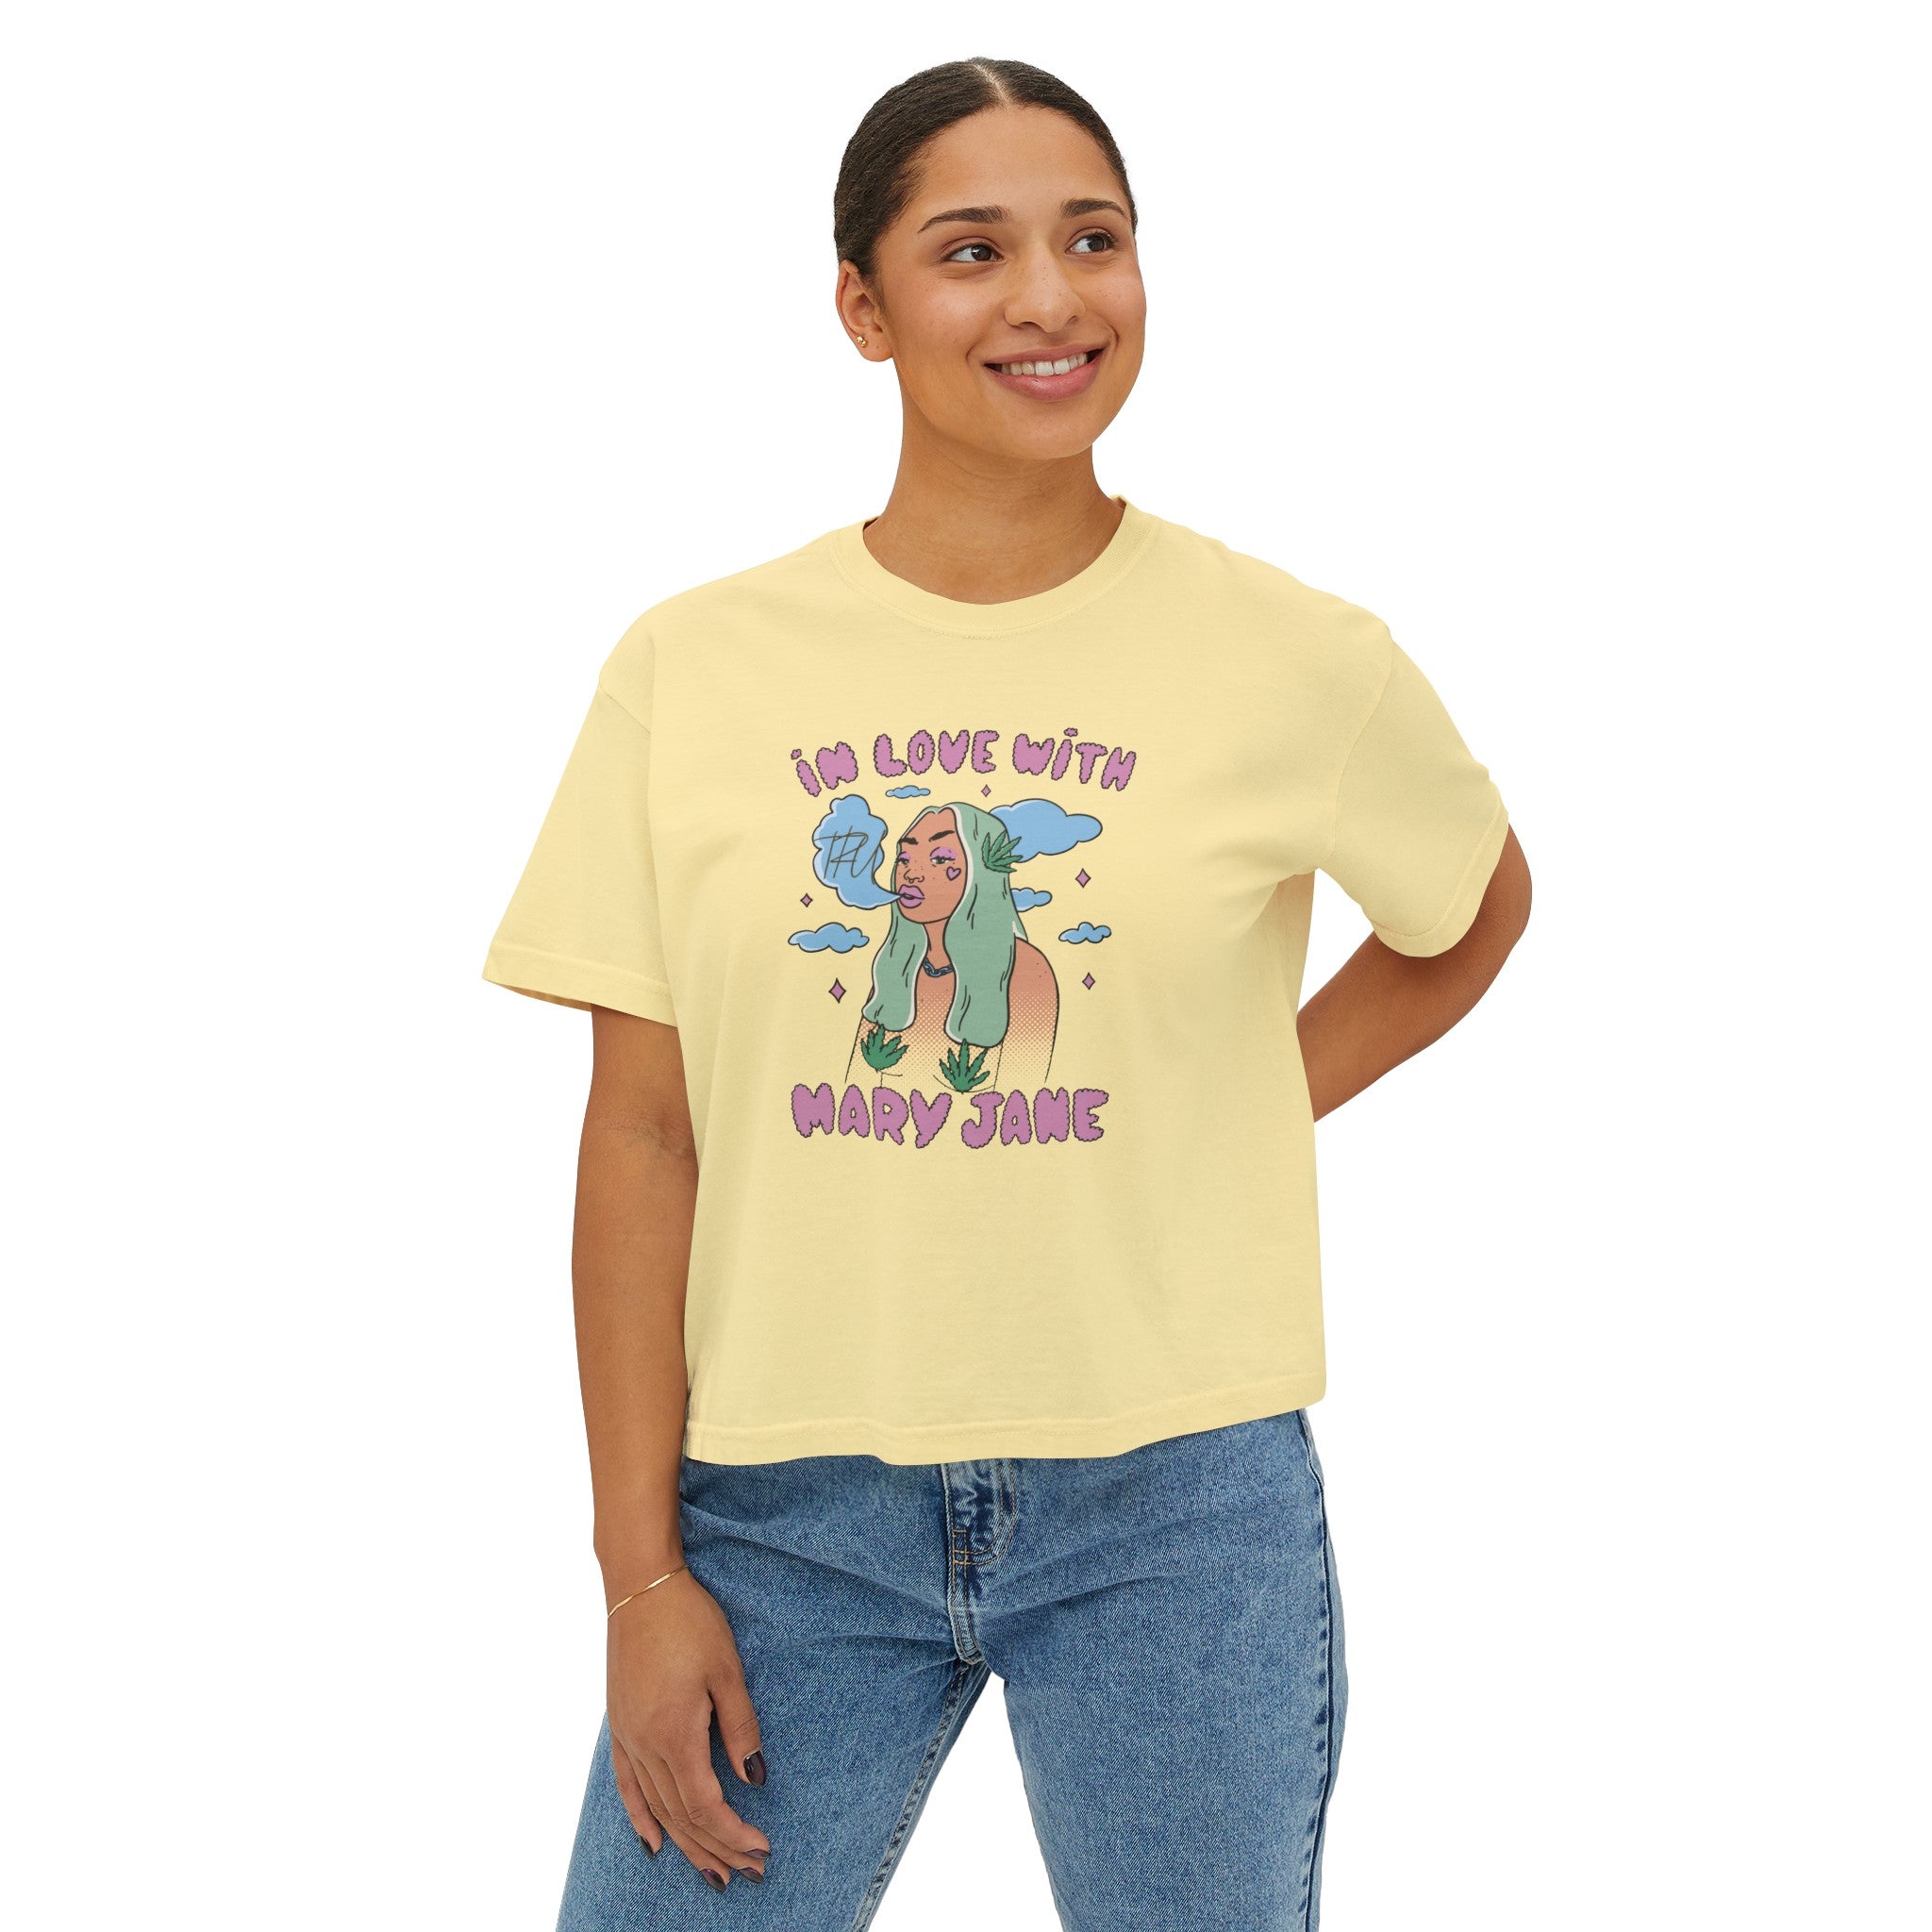 In Love With Mary Jane Graphic Tee - TreesRus2 Clothing